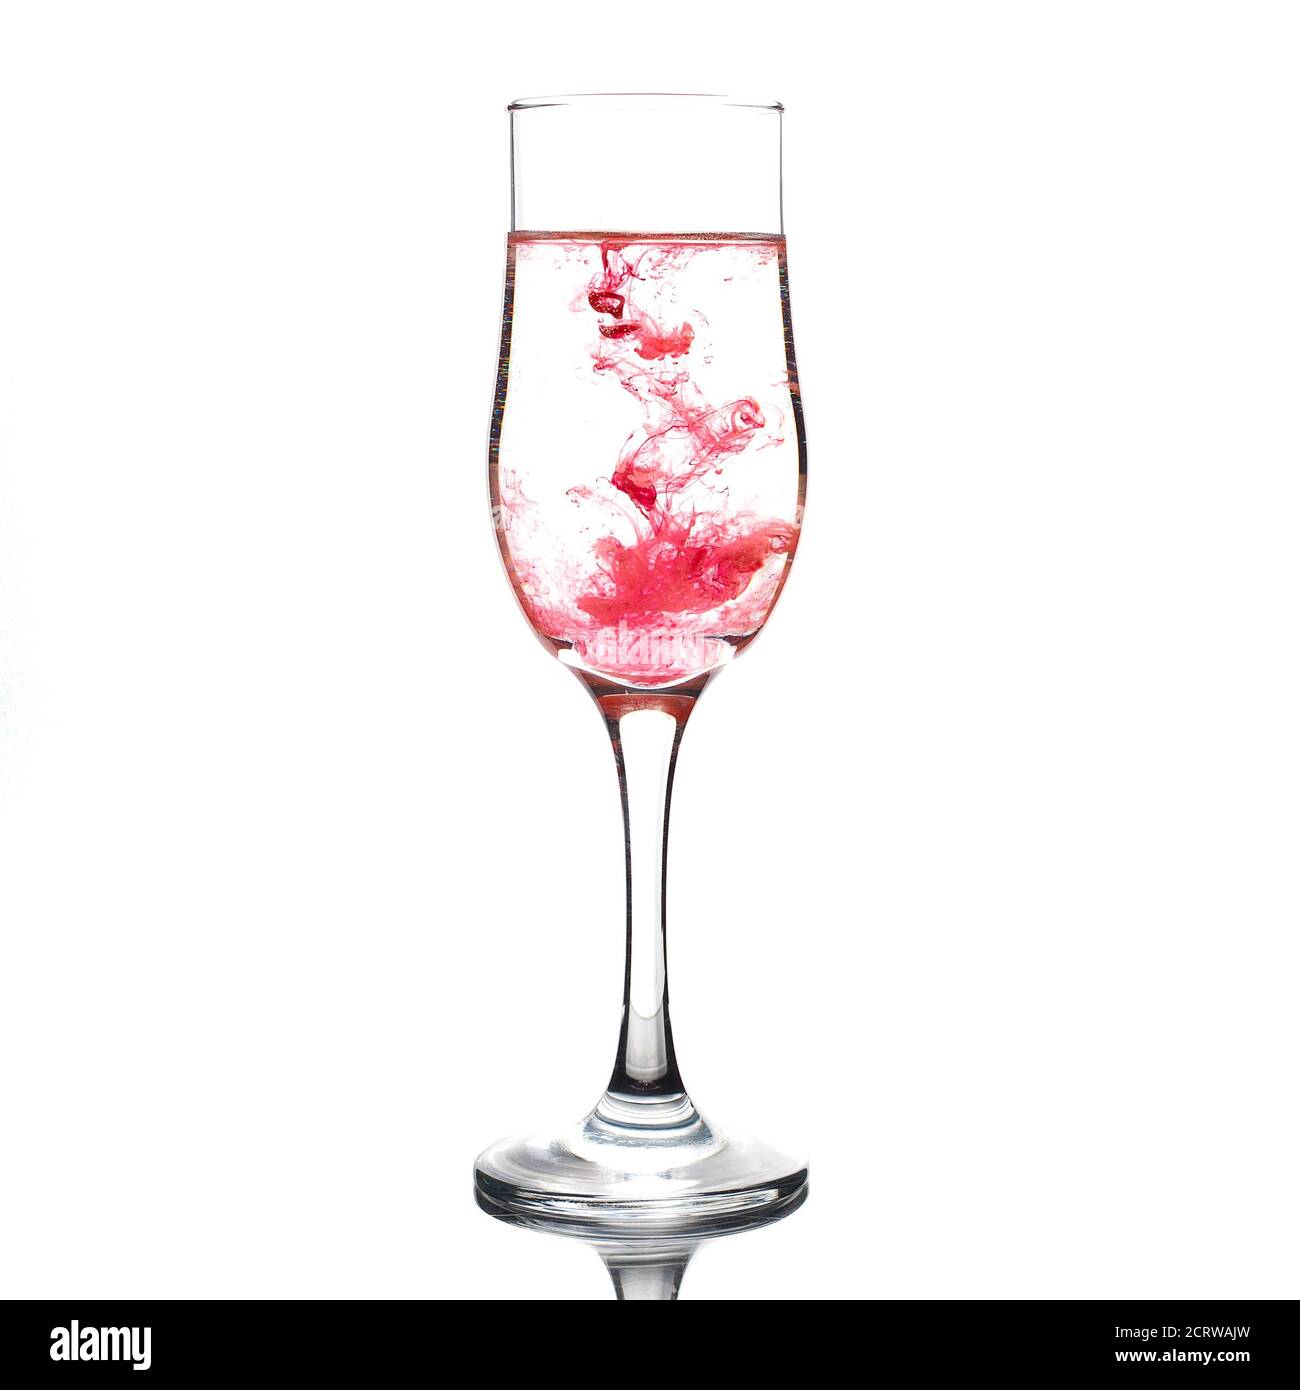 Food coloring diffuse in water inside wine glass area for slogan or advertising text message on white background Stock Photo